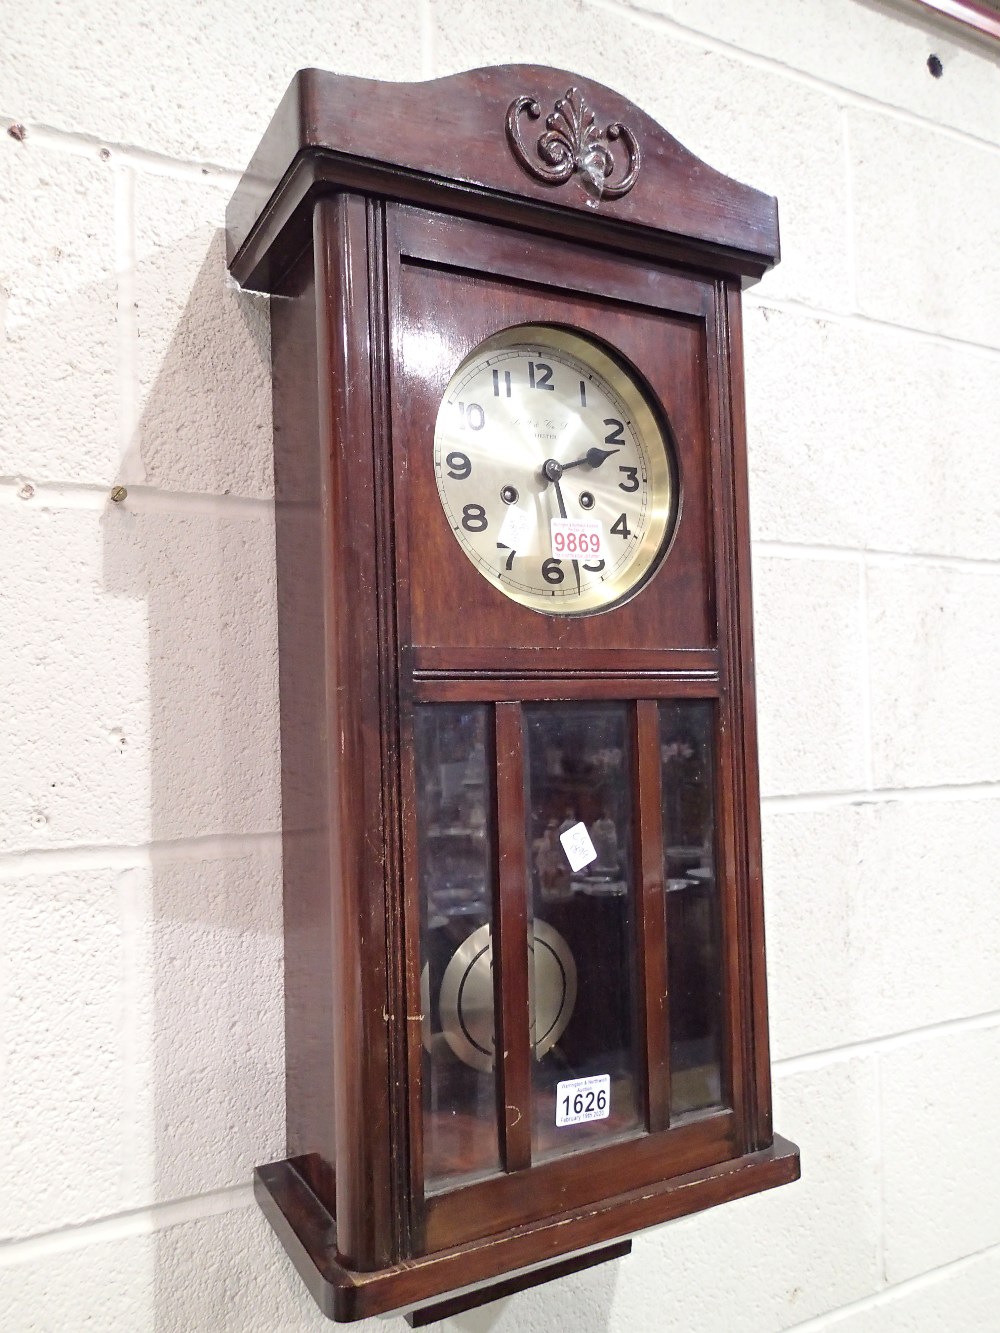 Mahogany wall clock with brass face by Butt and Co Ltd Chester